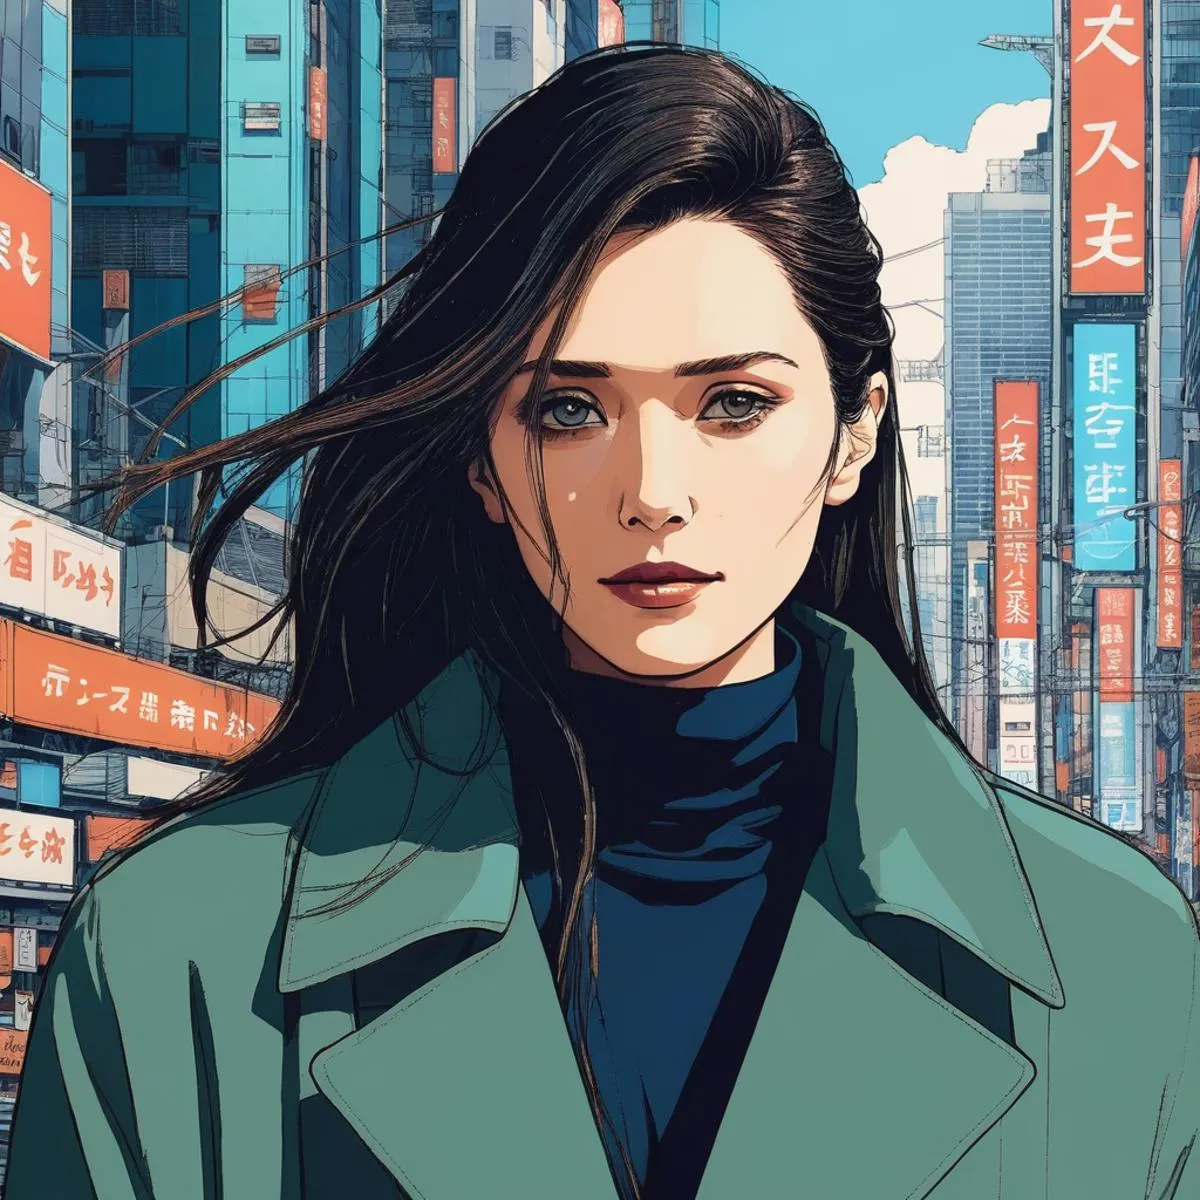 AI-generated image of an anime-style woman with long dark hair, wearing a green coat, set against a vibrant urban background with tall buildings and neon signs, created using Stable Diffusion.